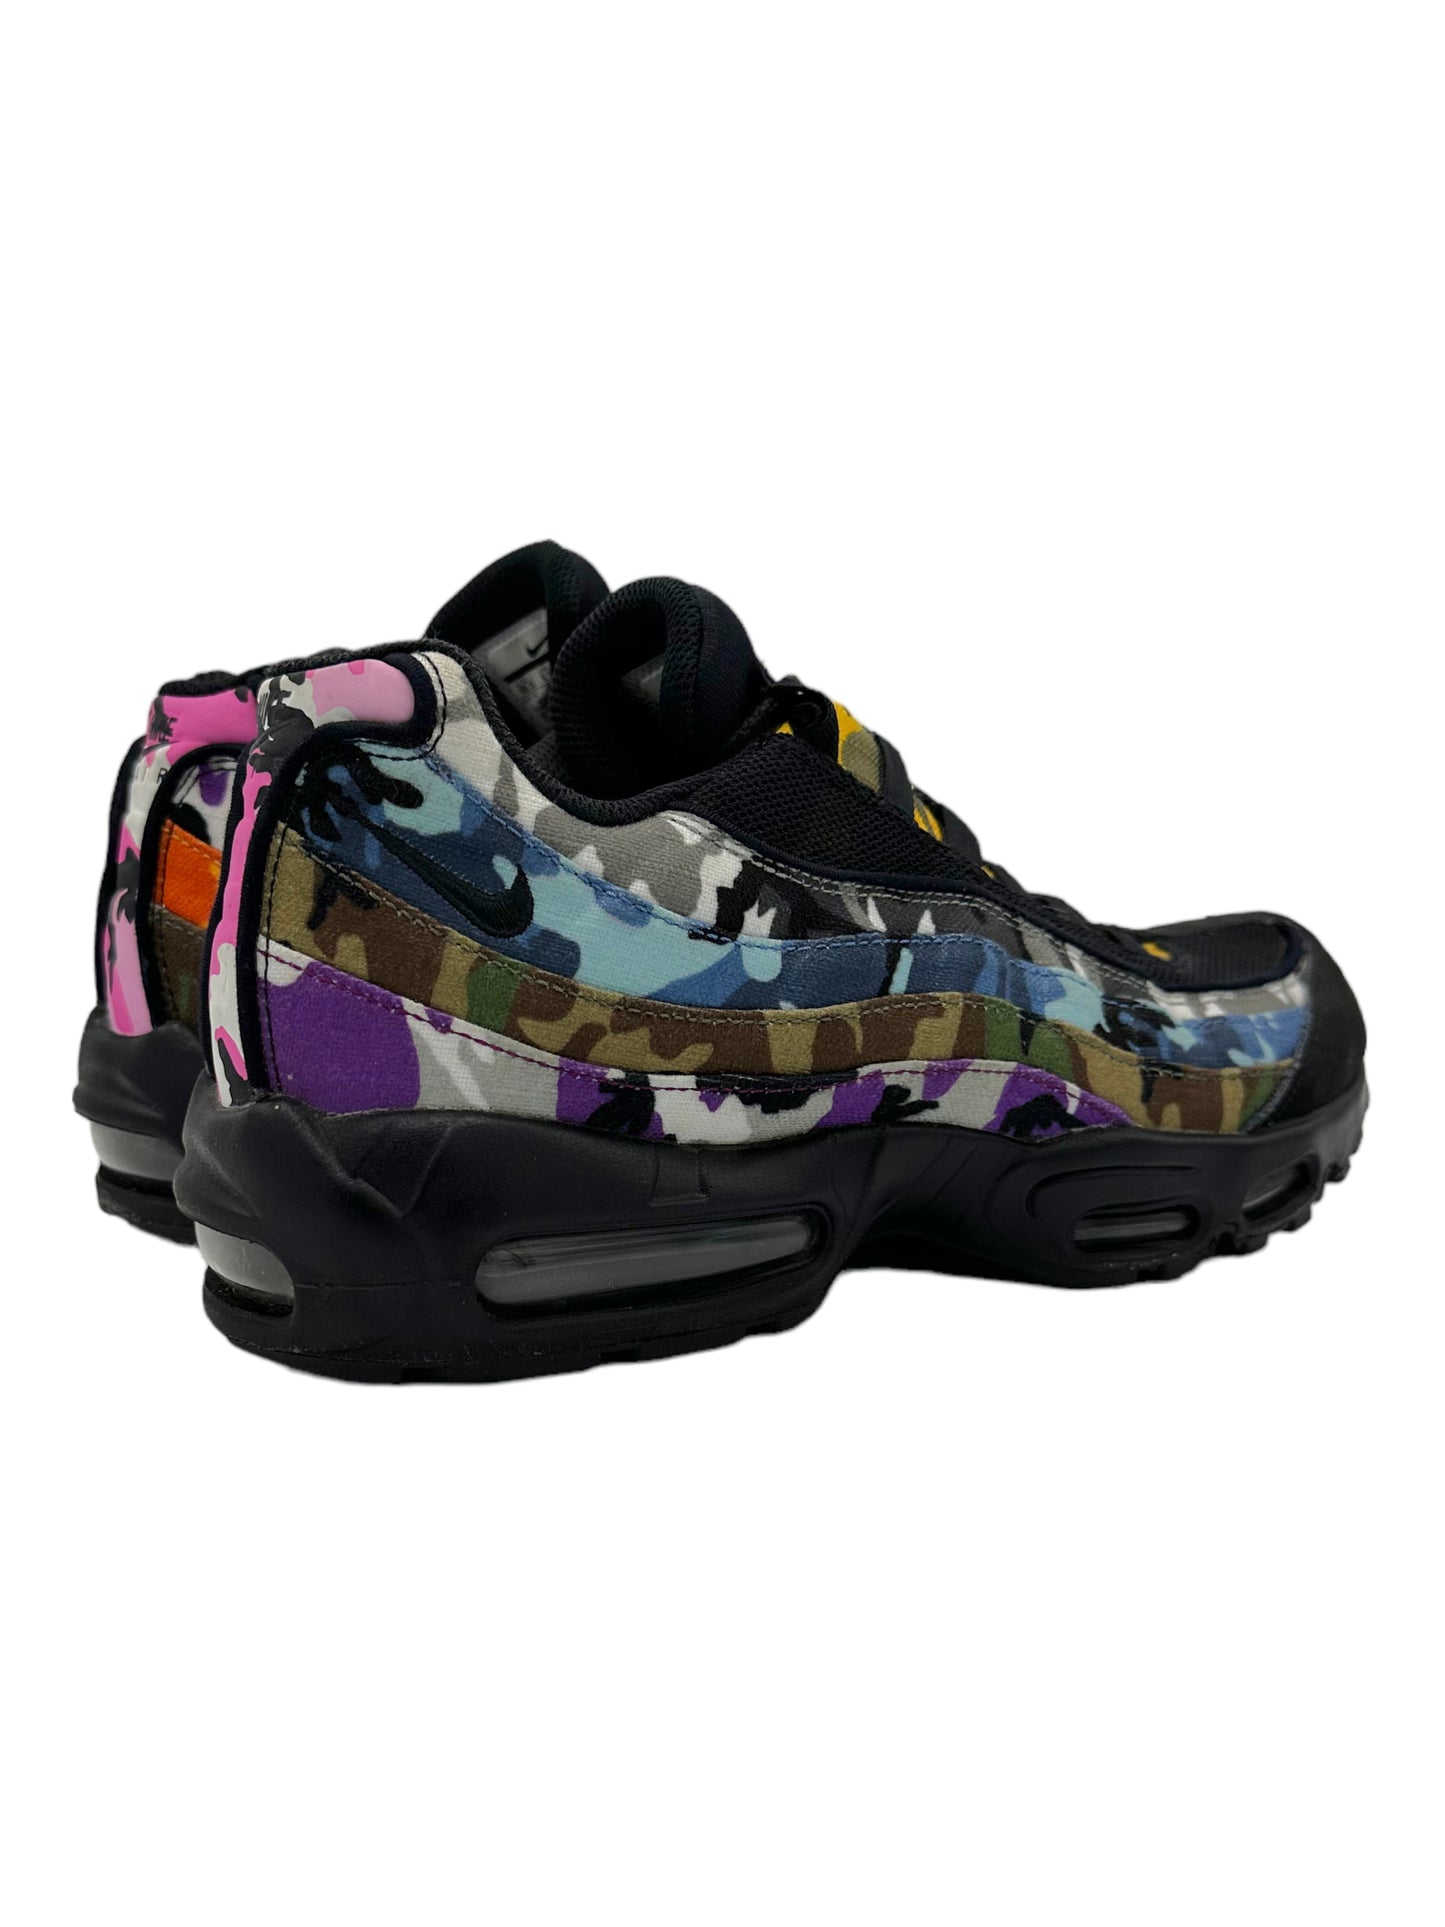 Nike Air Max 95 Black ERDL Party Sneakers - Genuine Design Luxury Consignment for Men. New & Pre-Owned Clothing, Shoes, & Accessories. Calgary, Canada